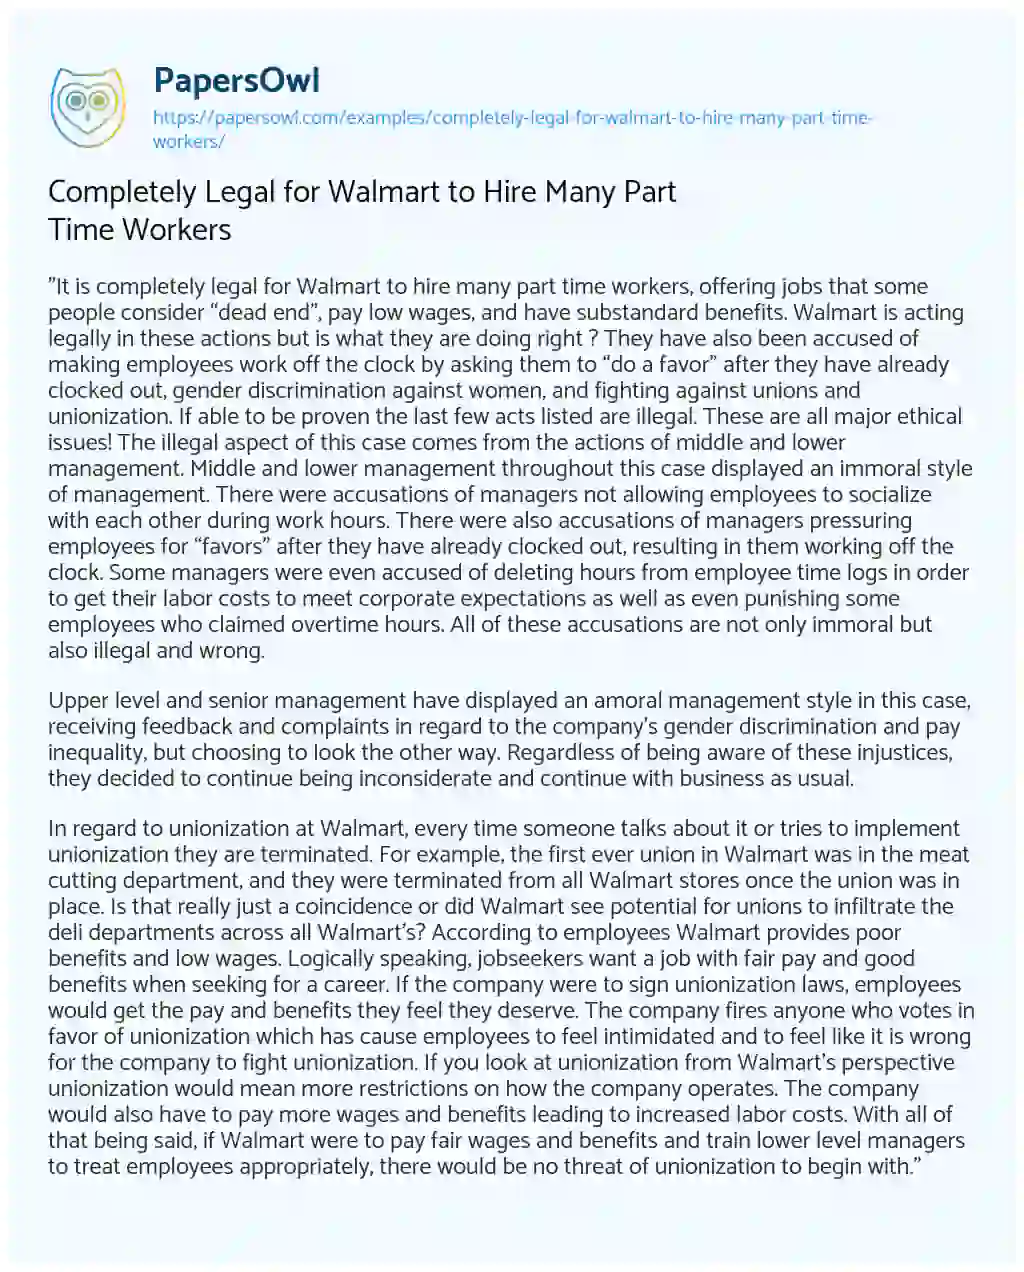 Completely Legal for Walmart to Hire Many Part Time Workers essay